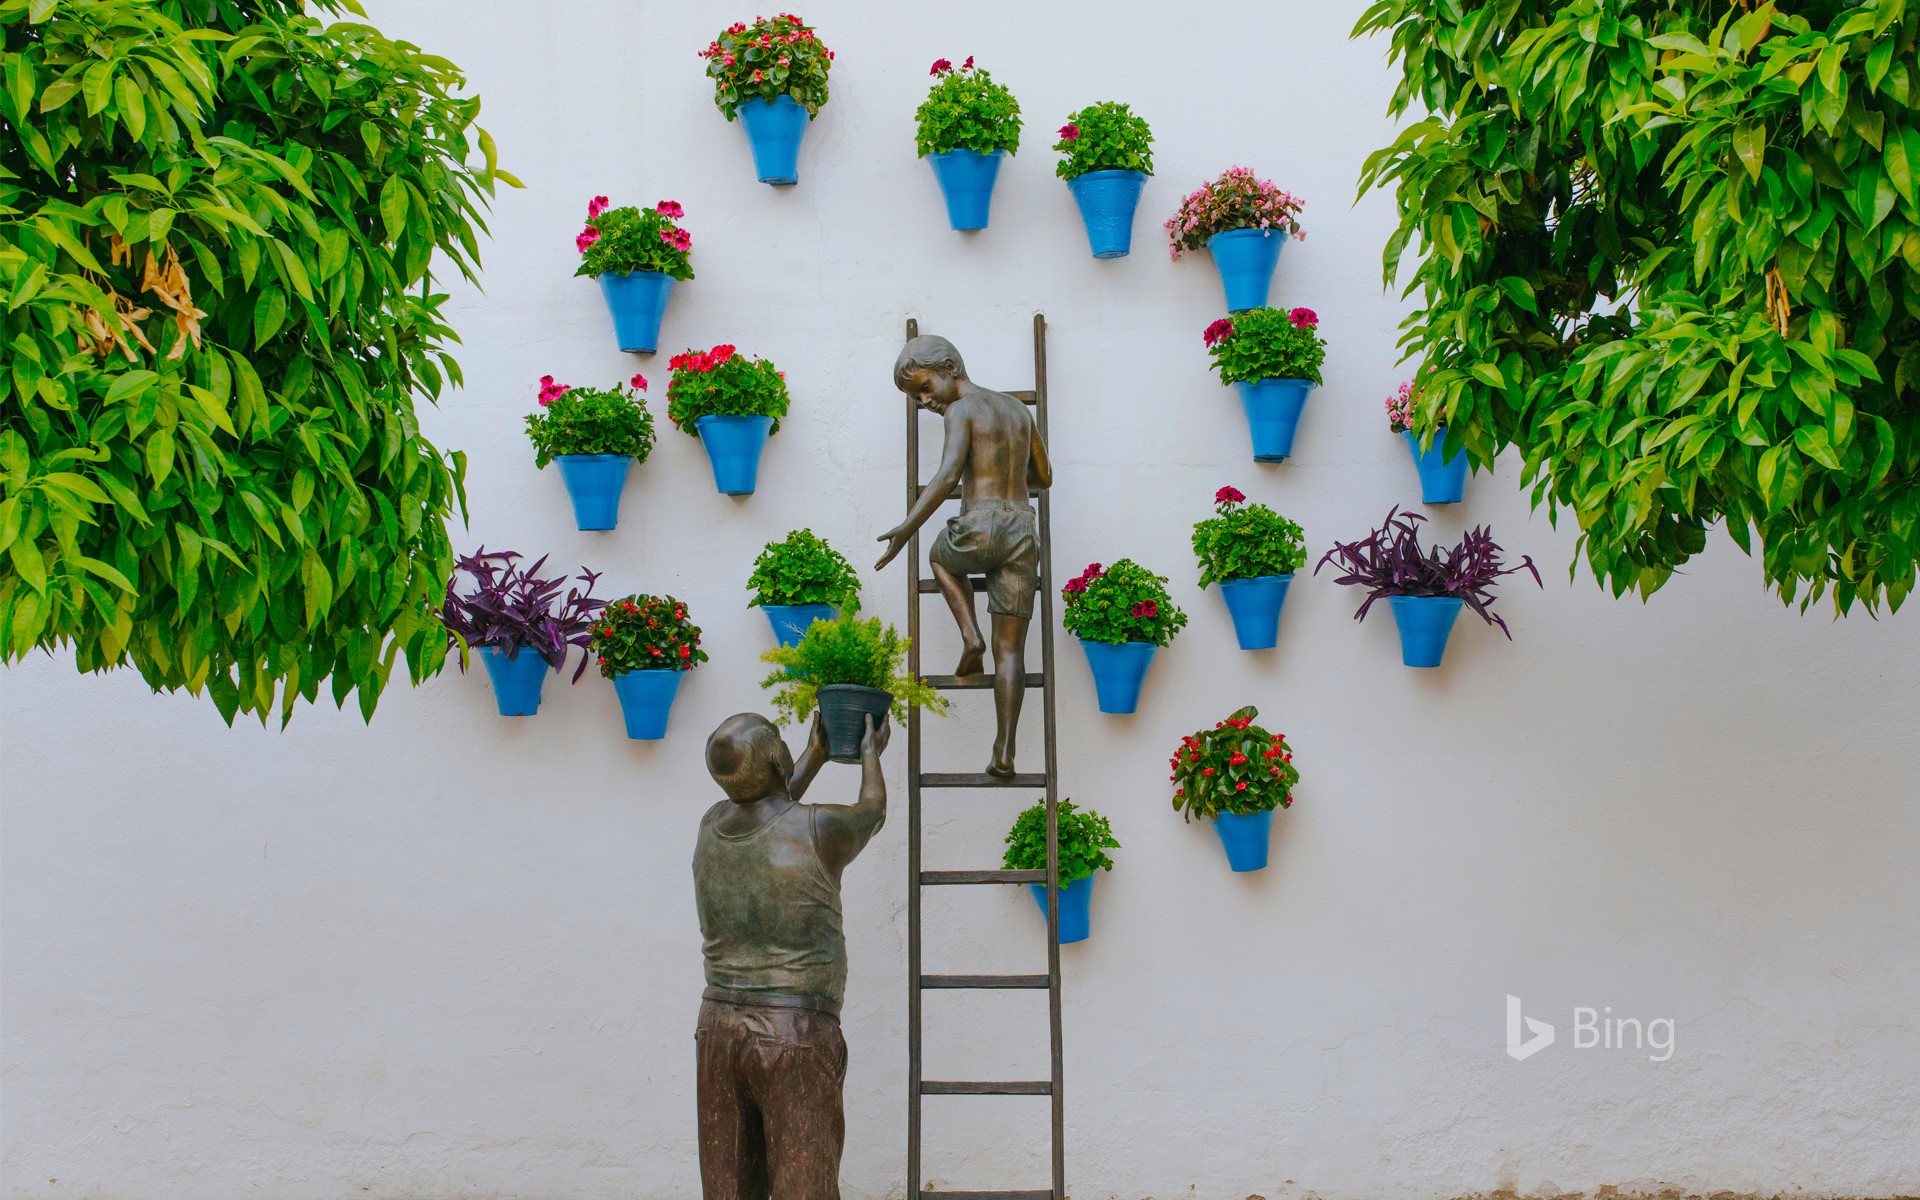 Bronze sculpture of a child and his grandfather caring for plants and flowers in the San Basilio neighborhood of Córdoba, Spain